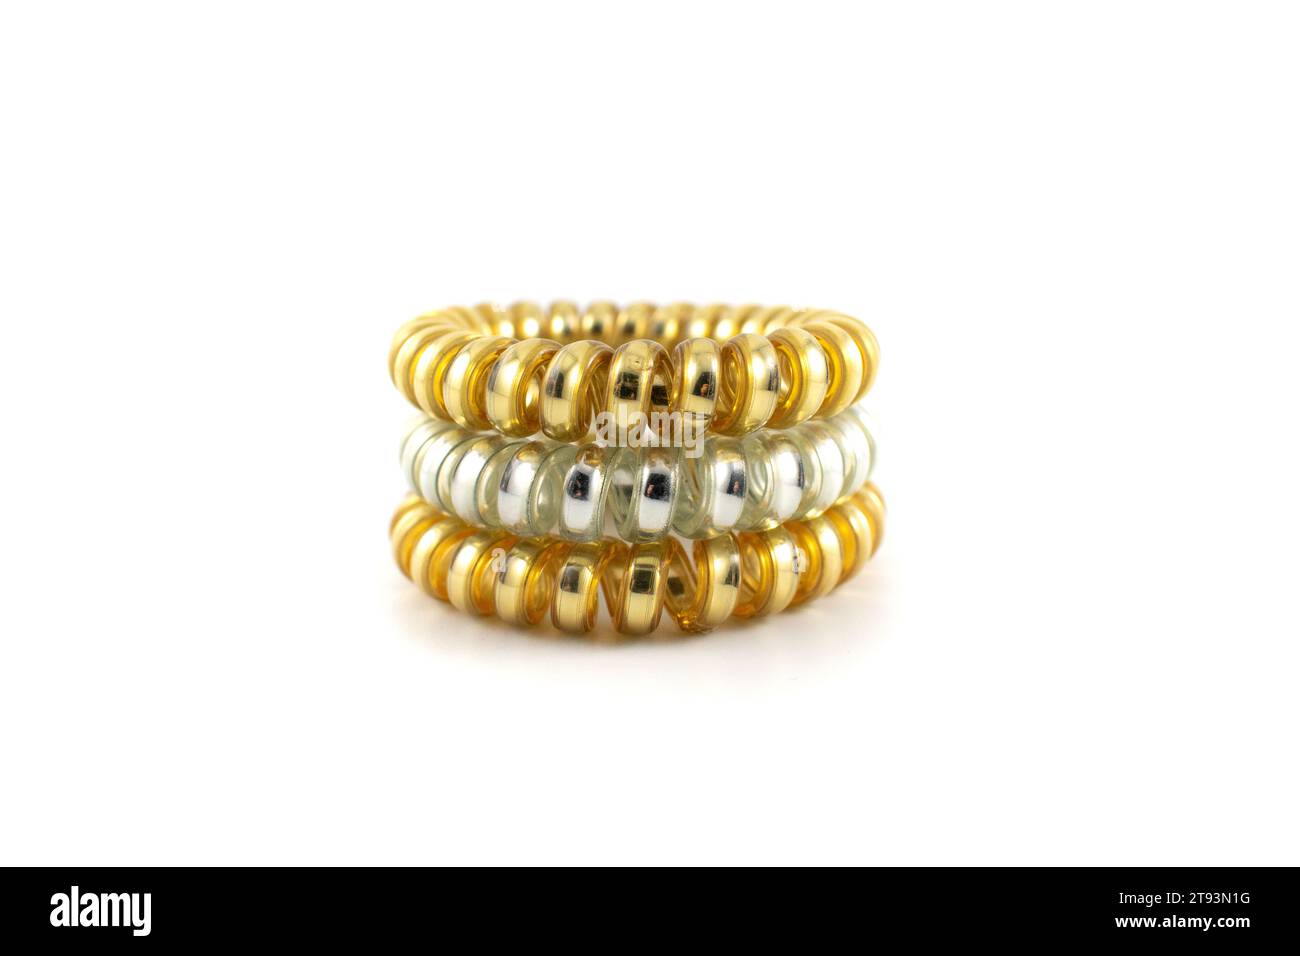 Close up photo of three metallic gold and silver plastic spiral hair ties Stock Photo